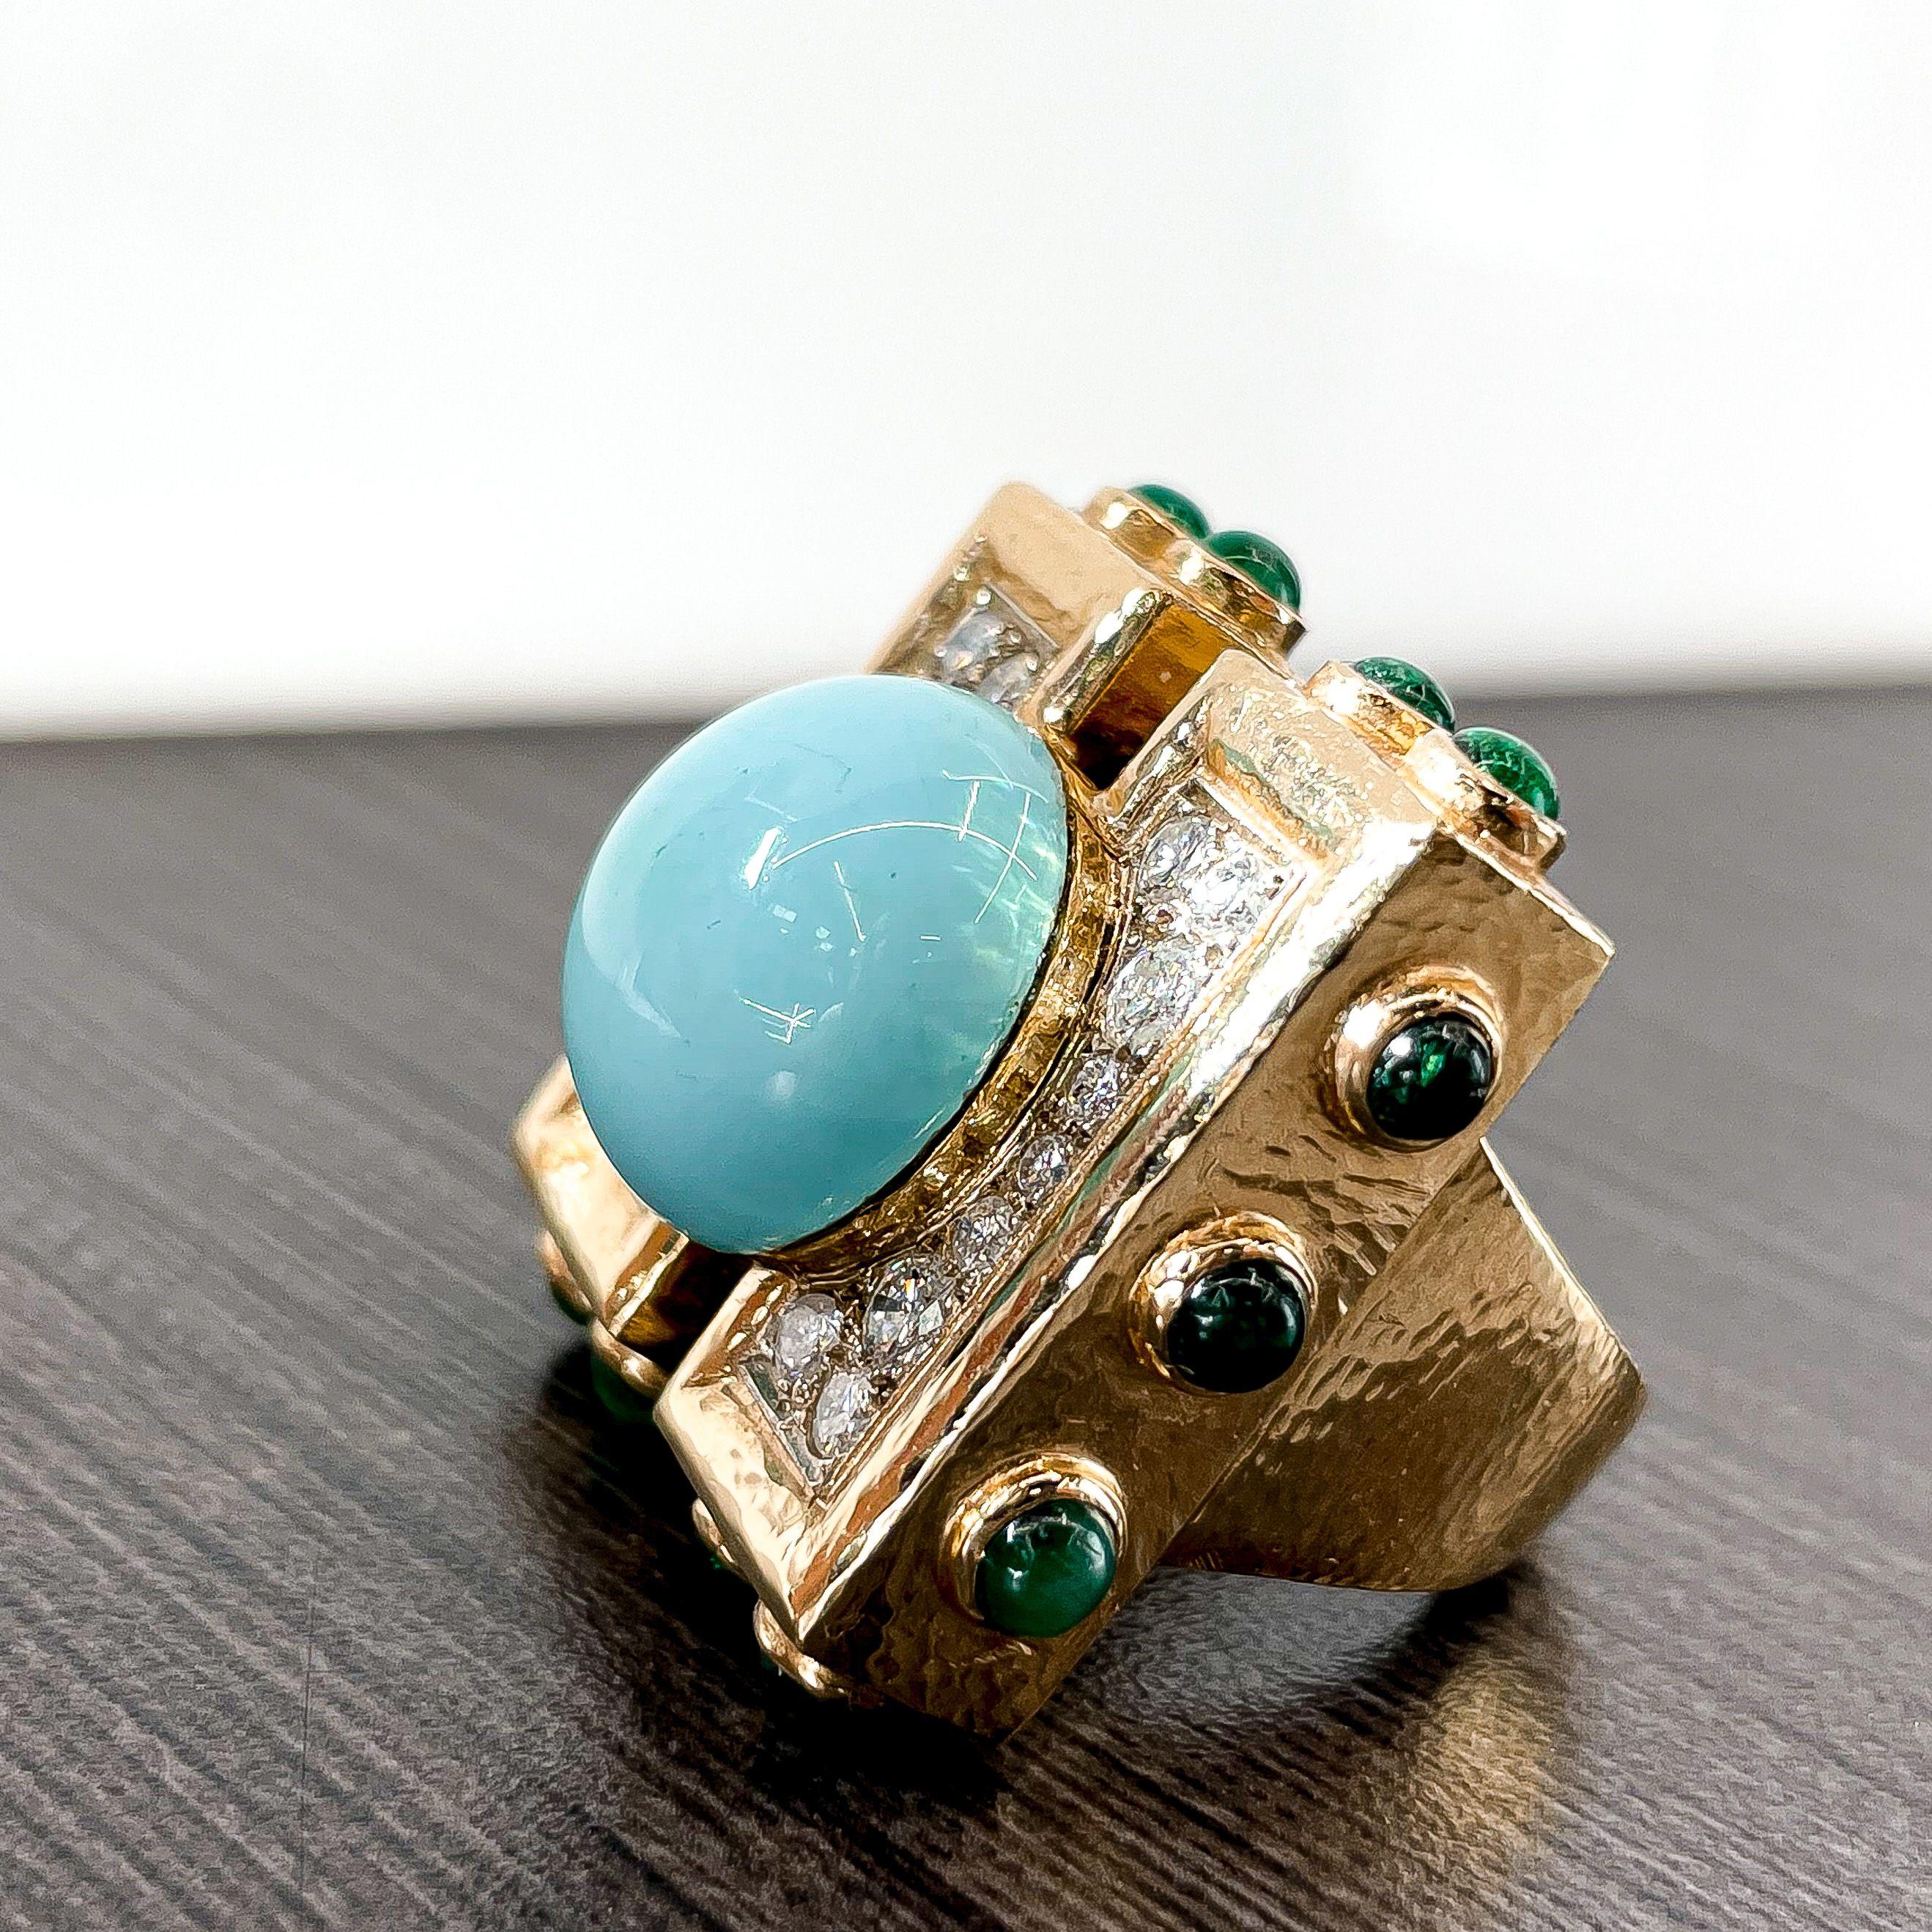 This is a truly one-of-a-kind vintage piece: the 18k yellow gold oversized David Webb cocktail ring. This stunning ring features a large turquoise stone at its center, framed by an oversized gold frame that is as bold as it is beautiful.

Adding to